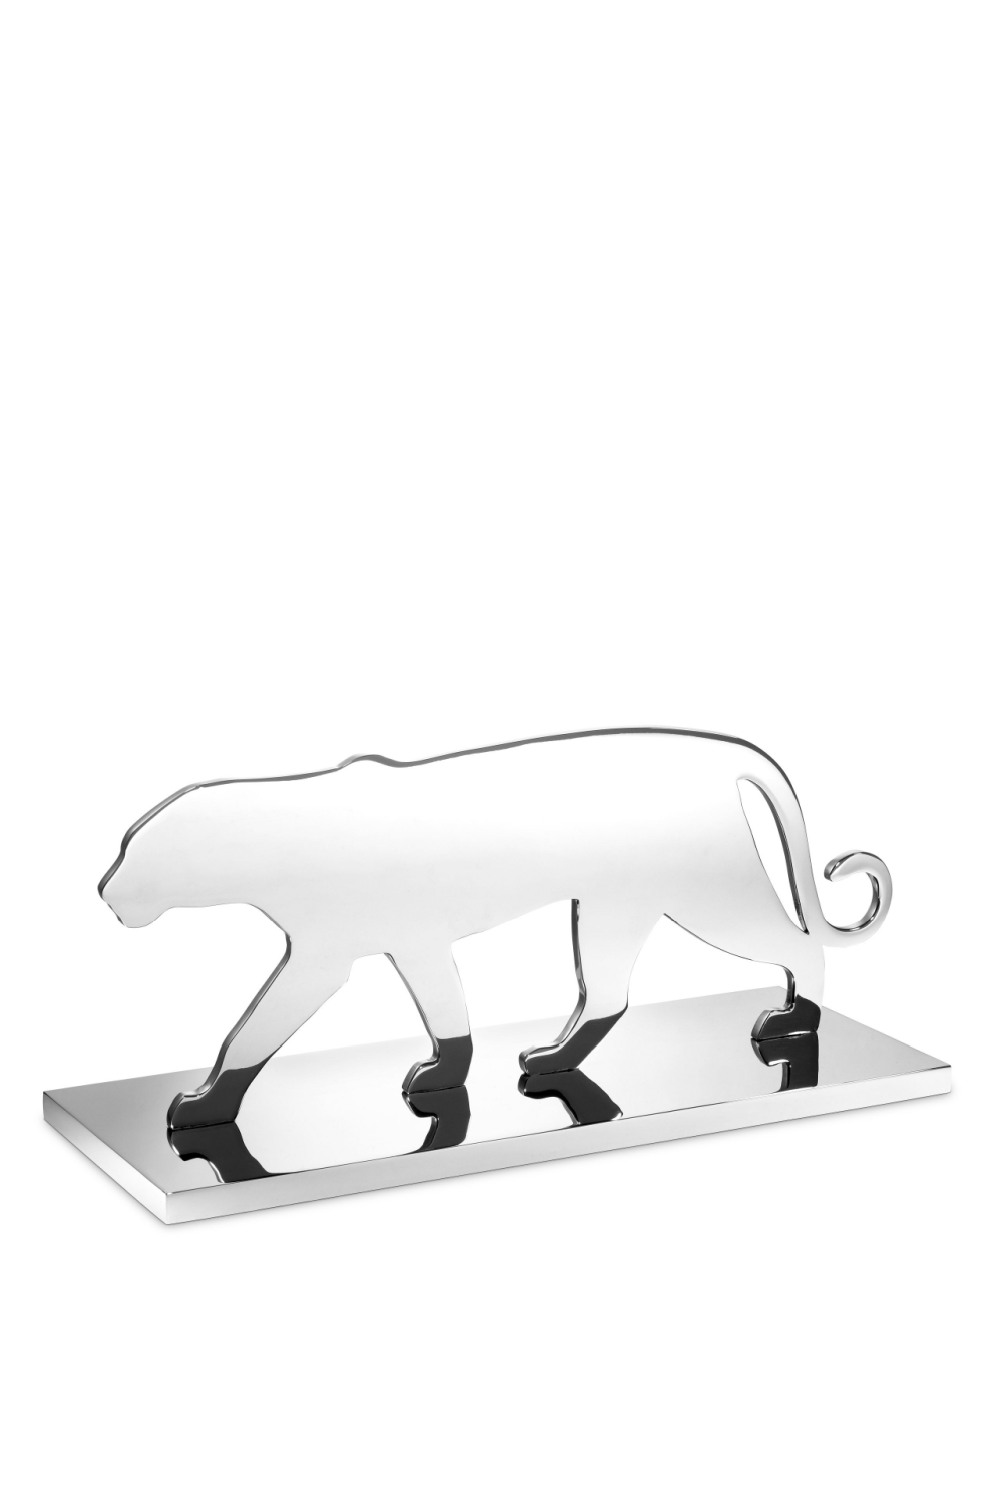 Silver Decorative Object | Eichholtz Panther Silhouette | OROA